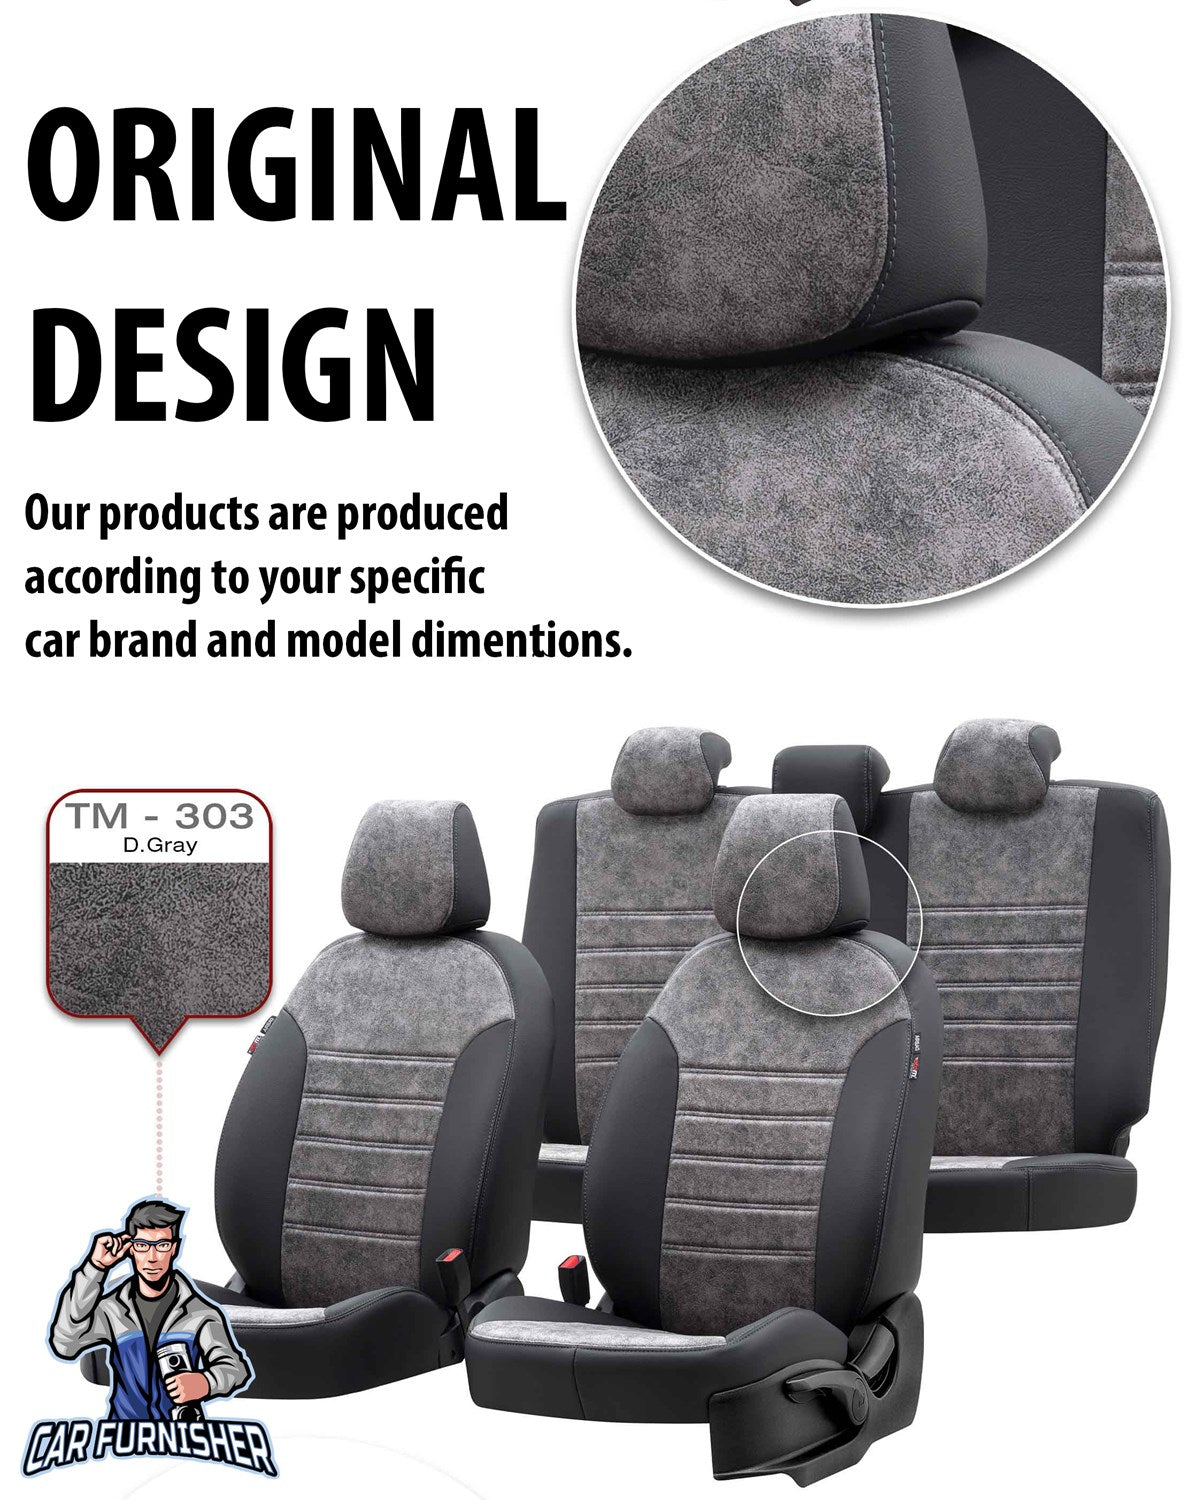 Toyota Corolla Seat Cover Milano Suede Design Beige Leather & Suede Fabric